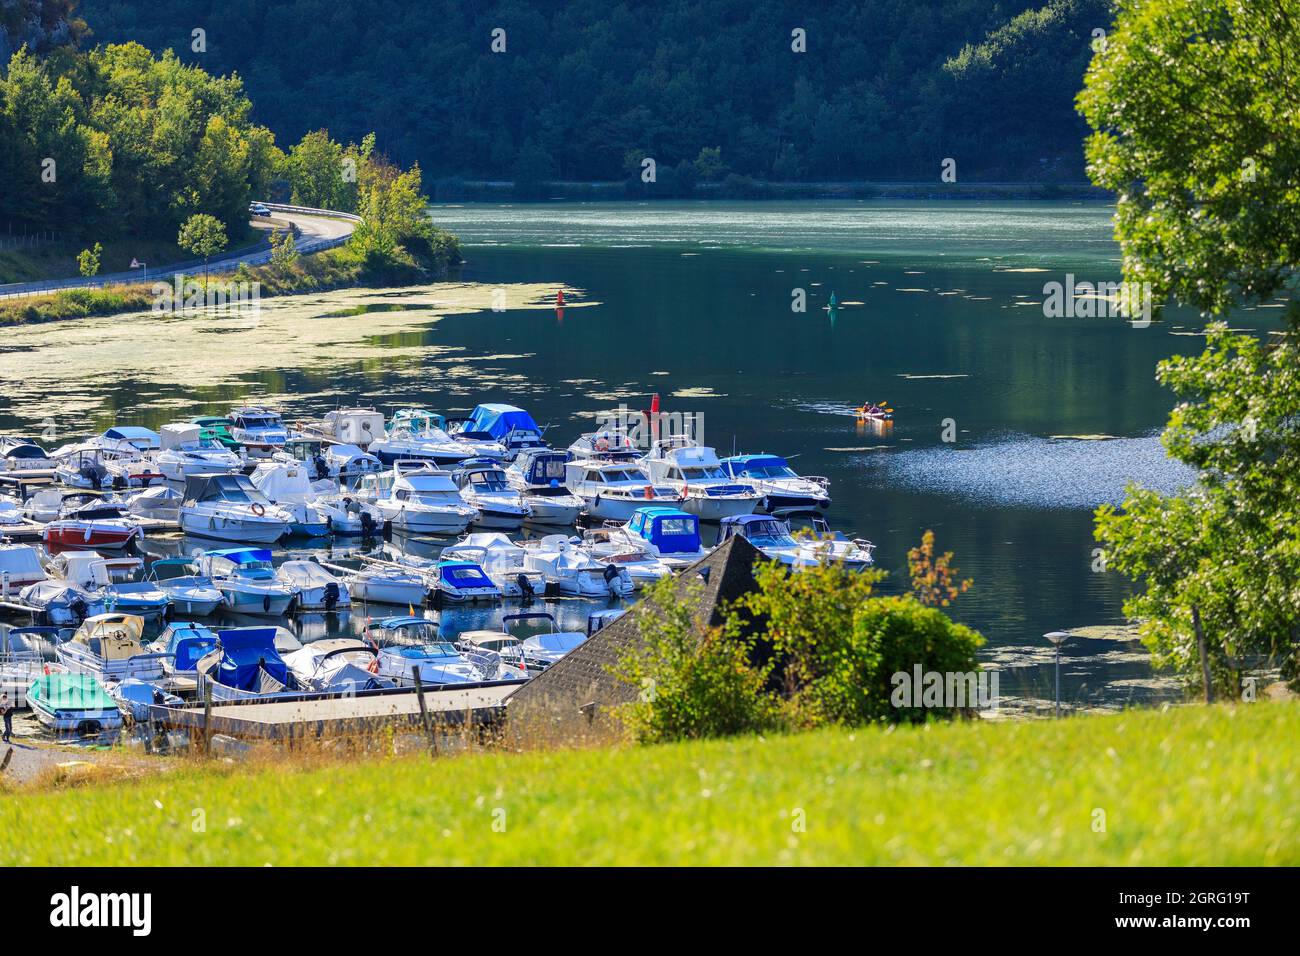 France, Ain, Massignieu de Rives, lake of Lit au Roi on the Rhone river, the port, boats Stock Photo